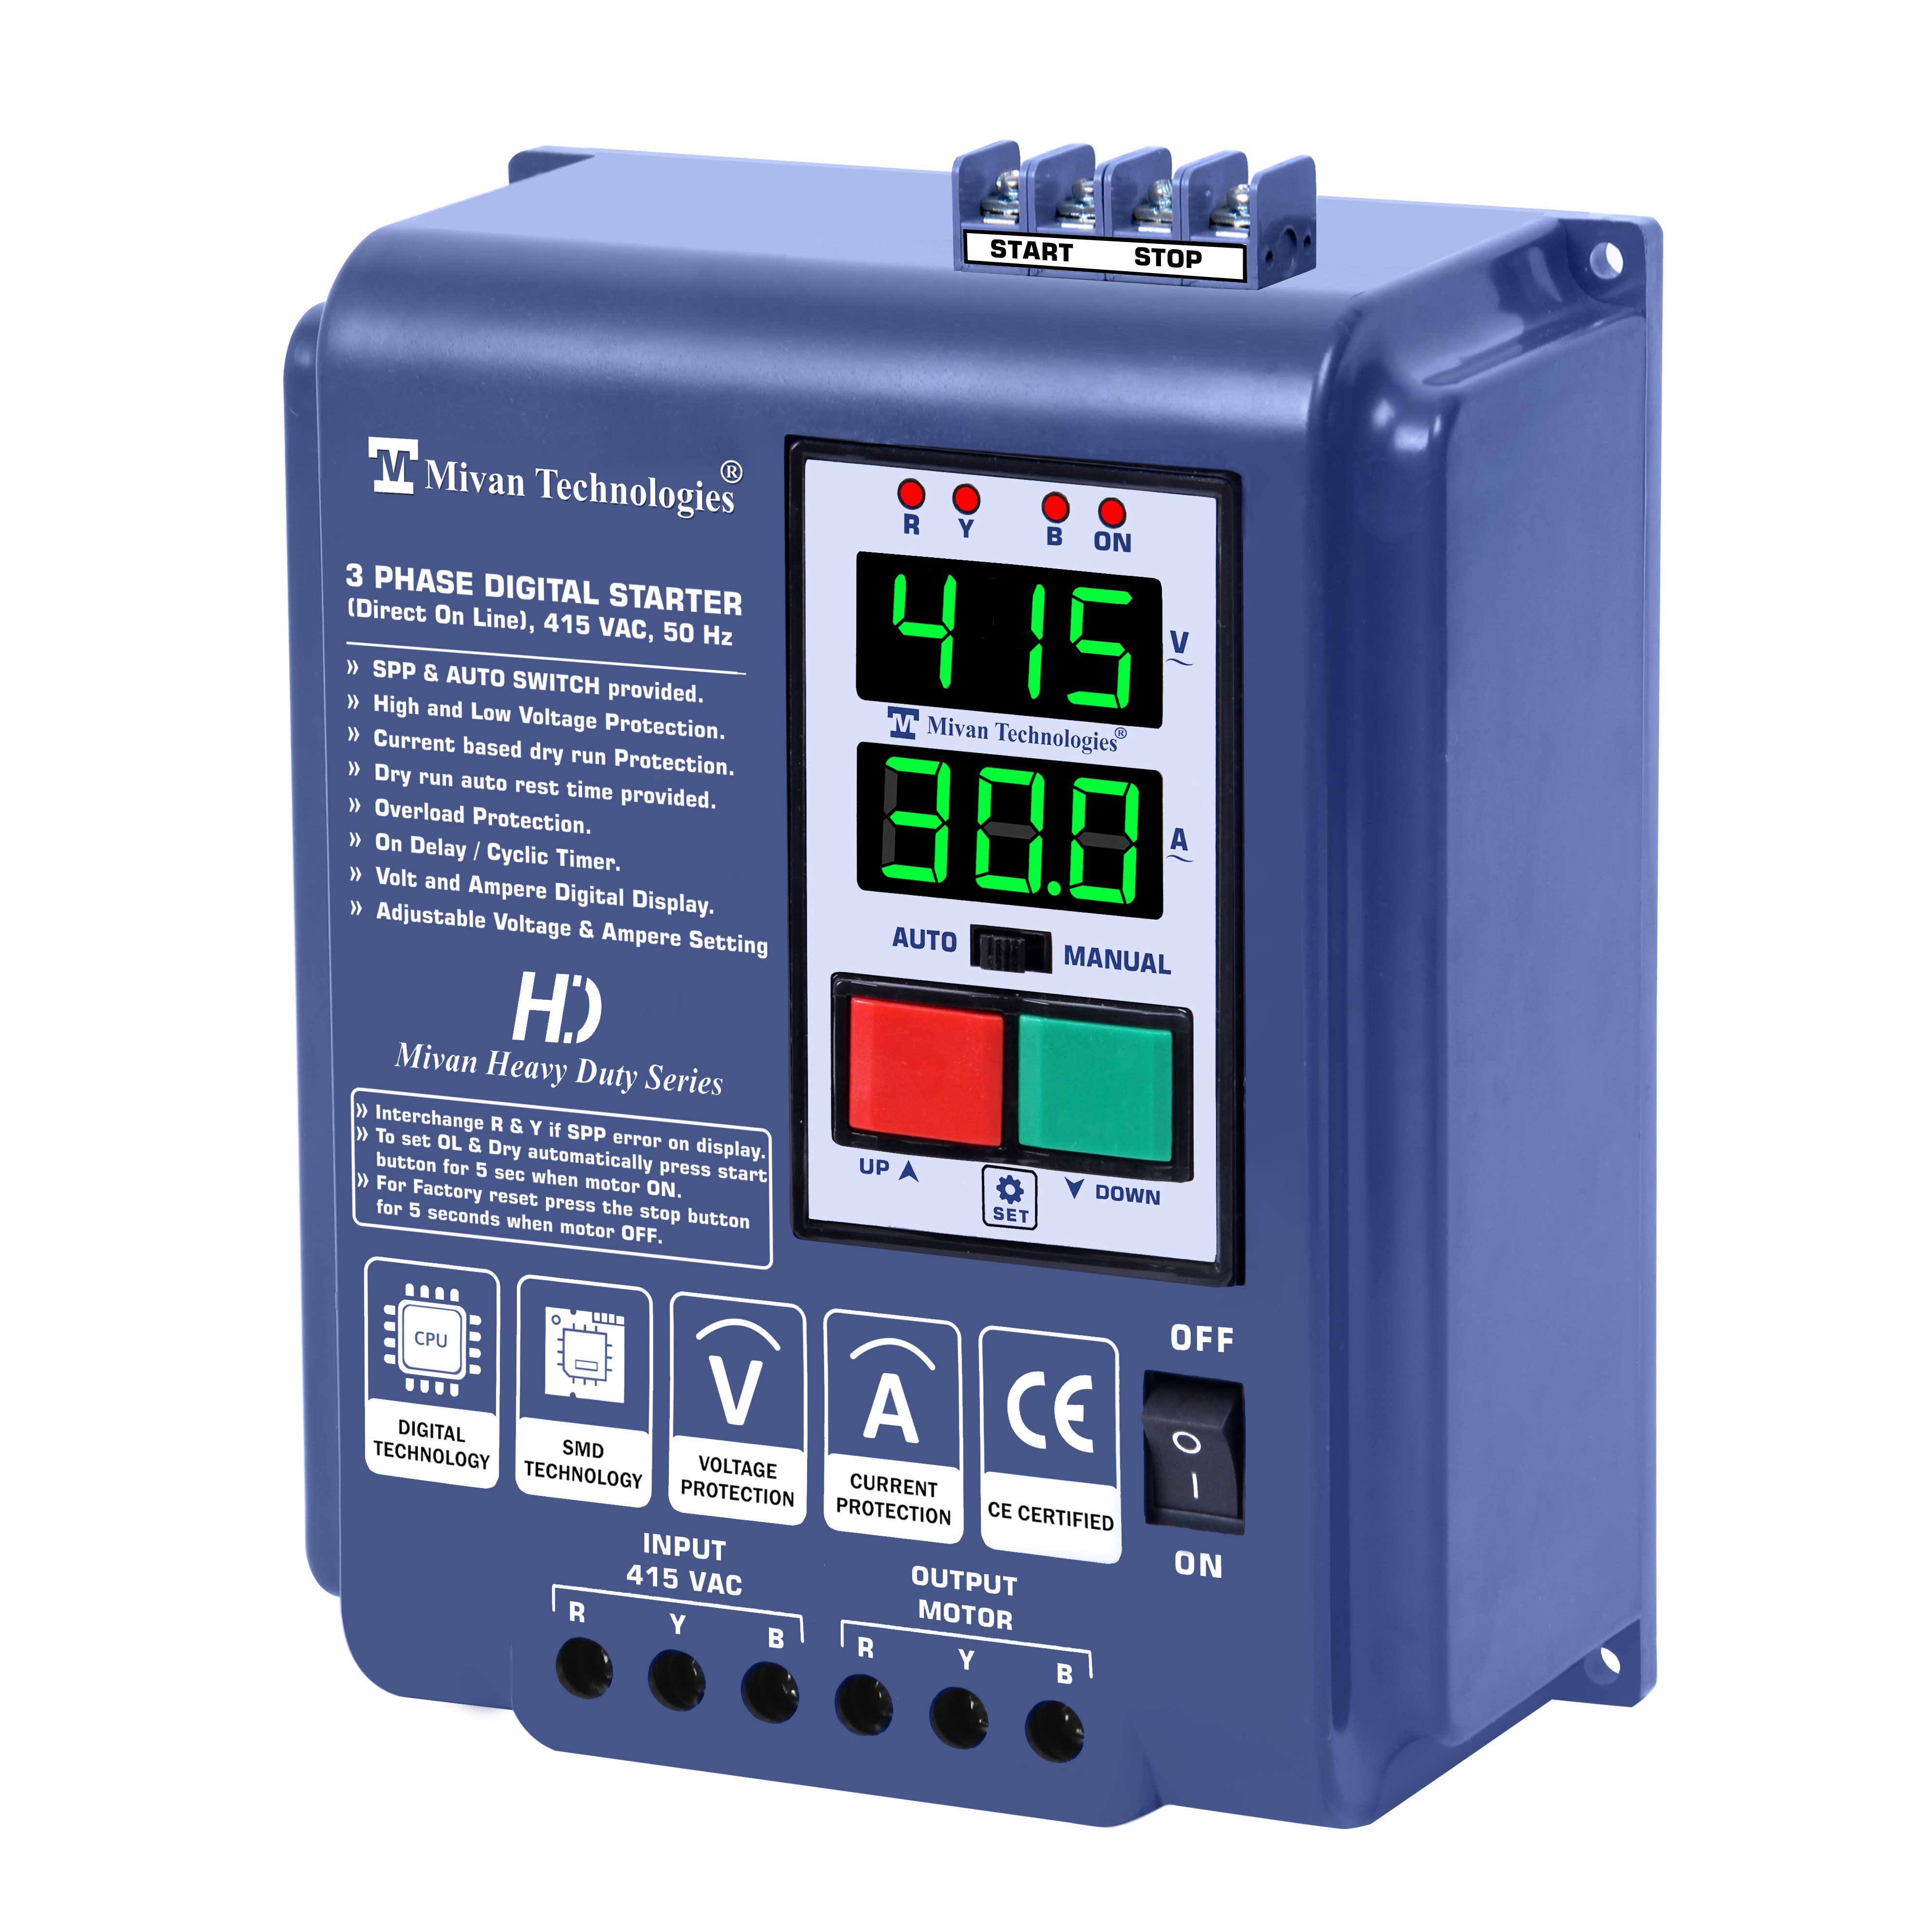 DP 301S SE HD 3 Phase DOL Digital Starter with external start stop connection for 3 Phase Motor Suitable up to 10 hp Motor with HV LV OL Dry protections with SPP Auto switch and cyclic timer